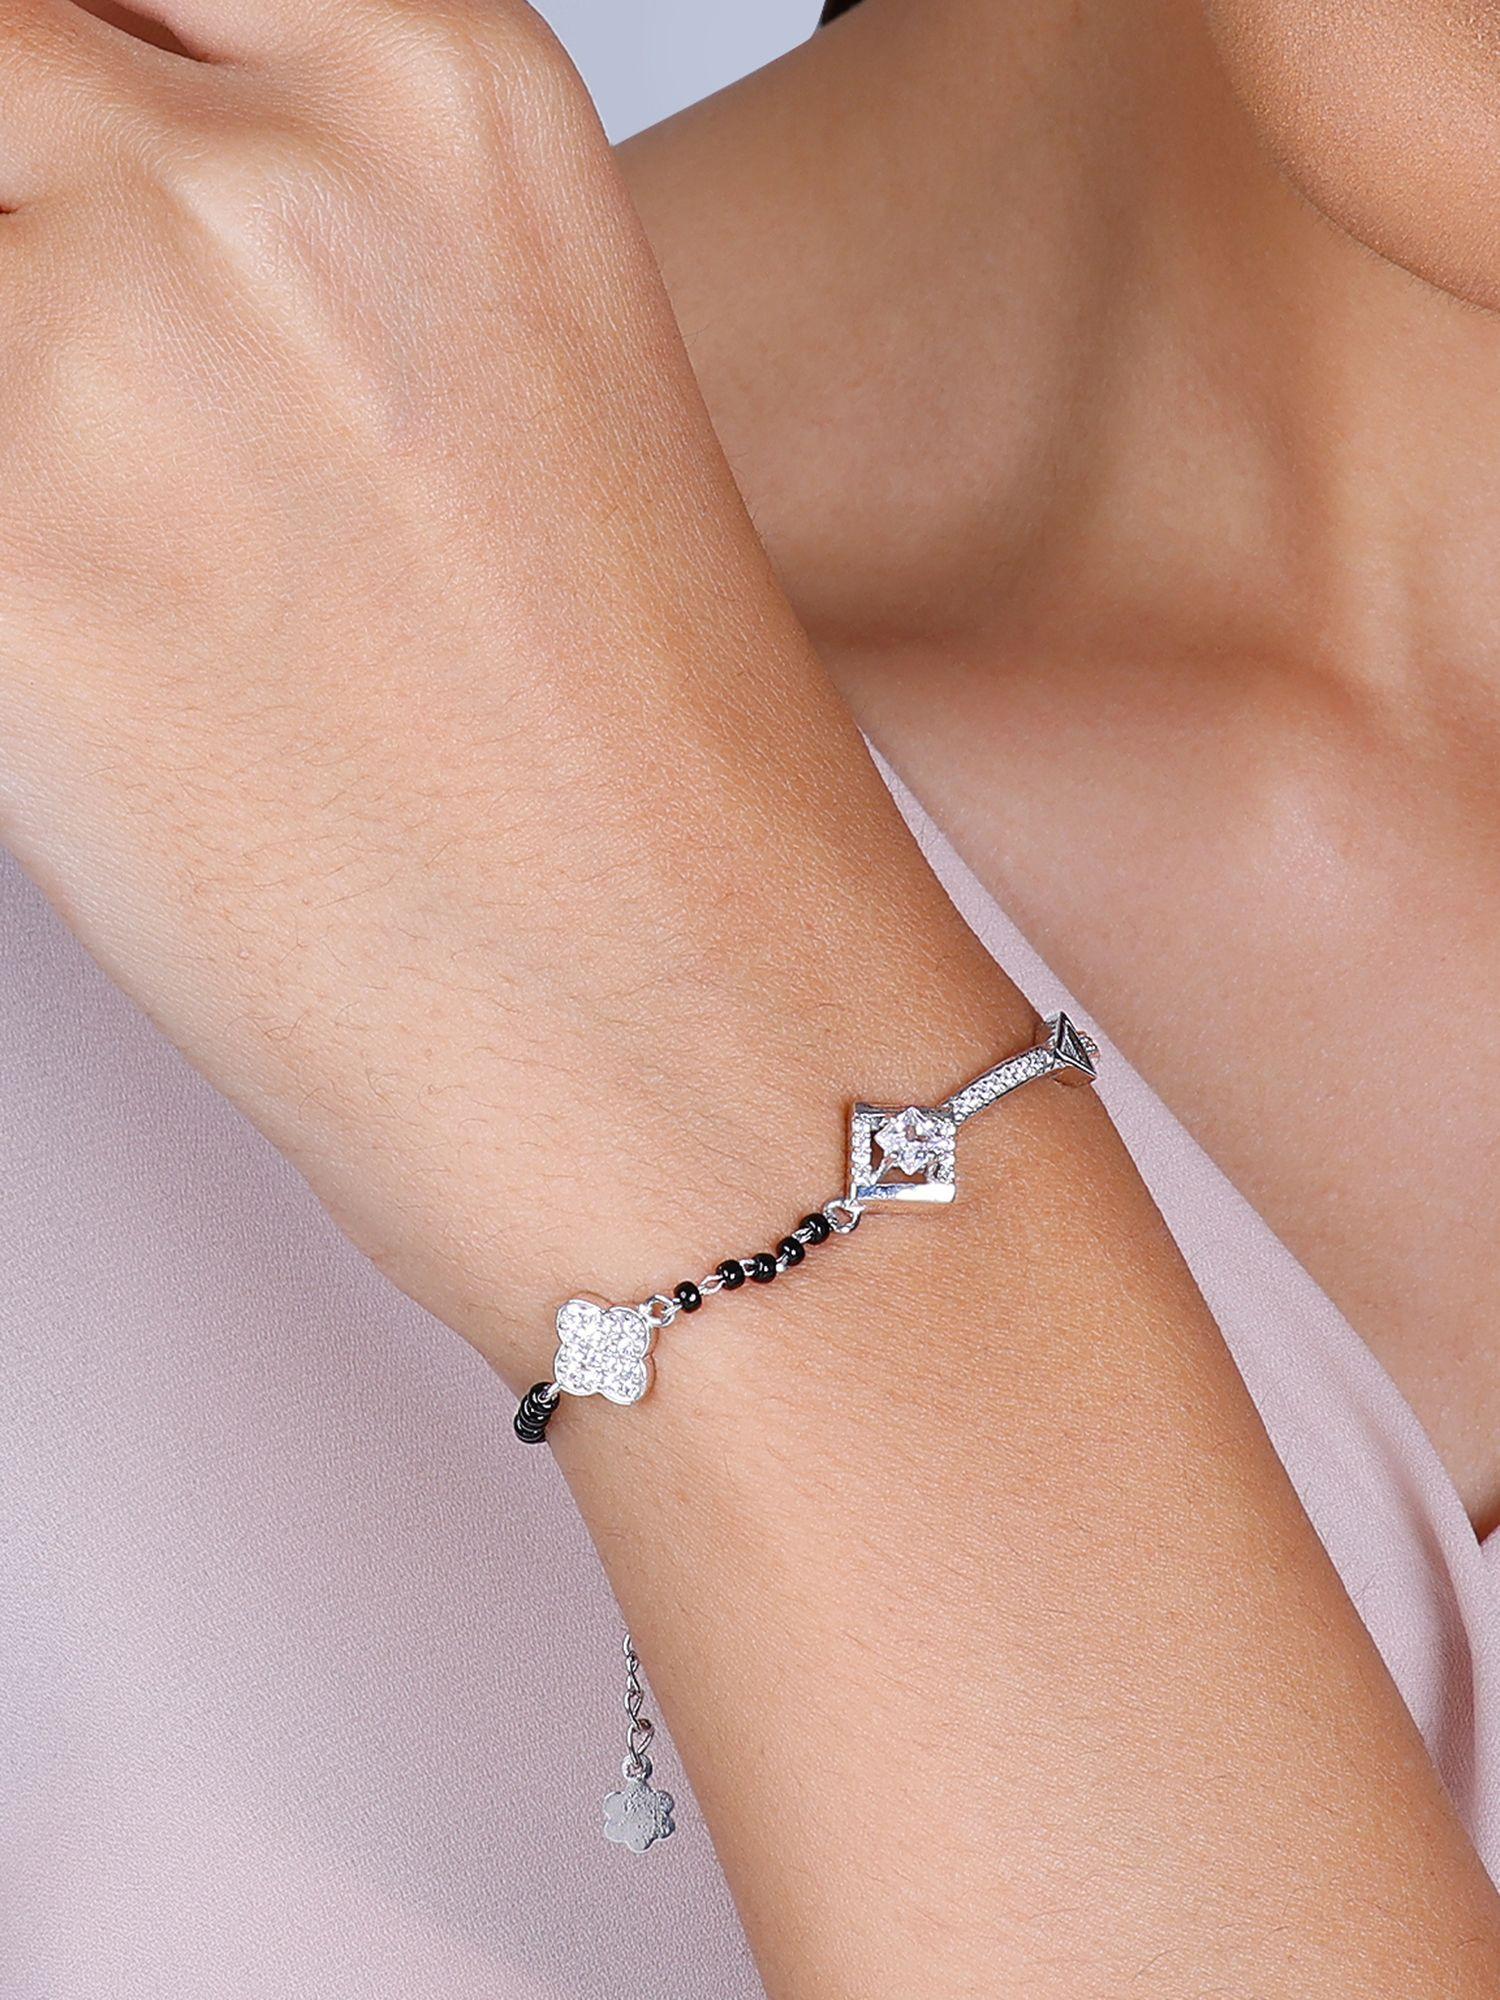 sterling silver love my bae mangalsutra bracelet for womens and girls